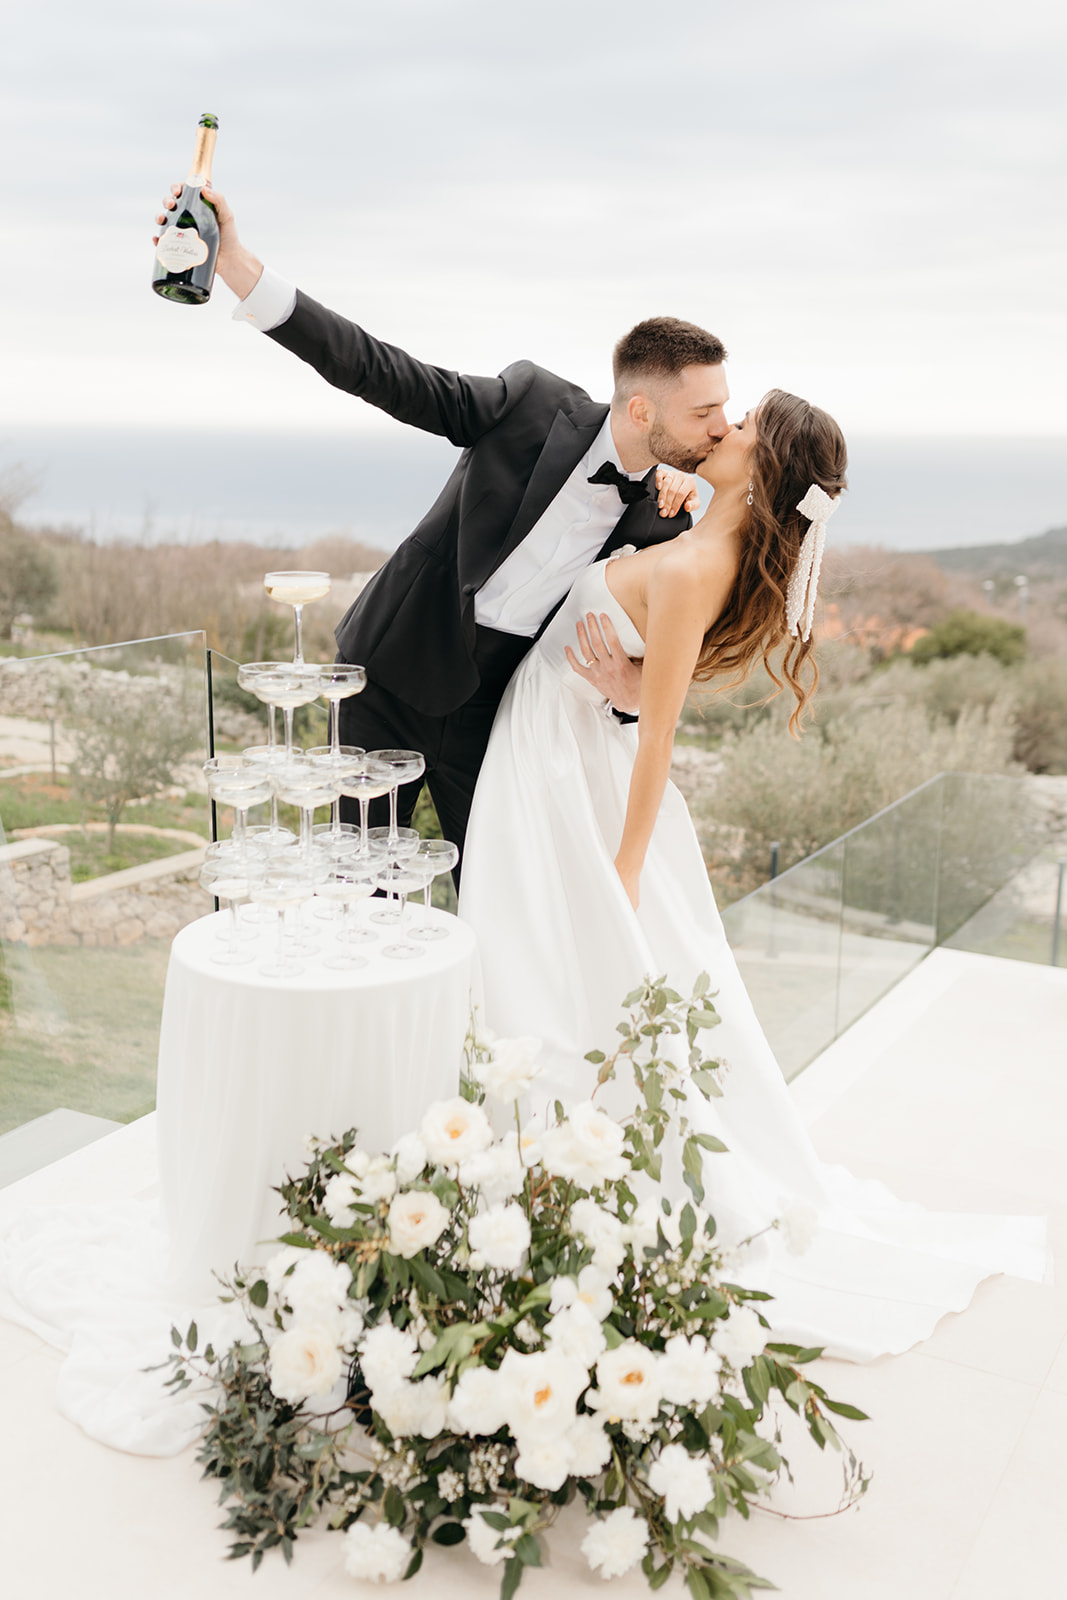 Romantic champagne toast at reception